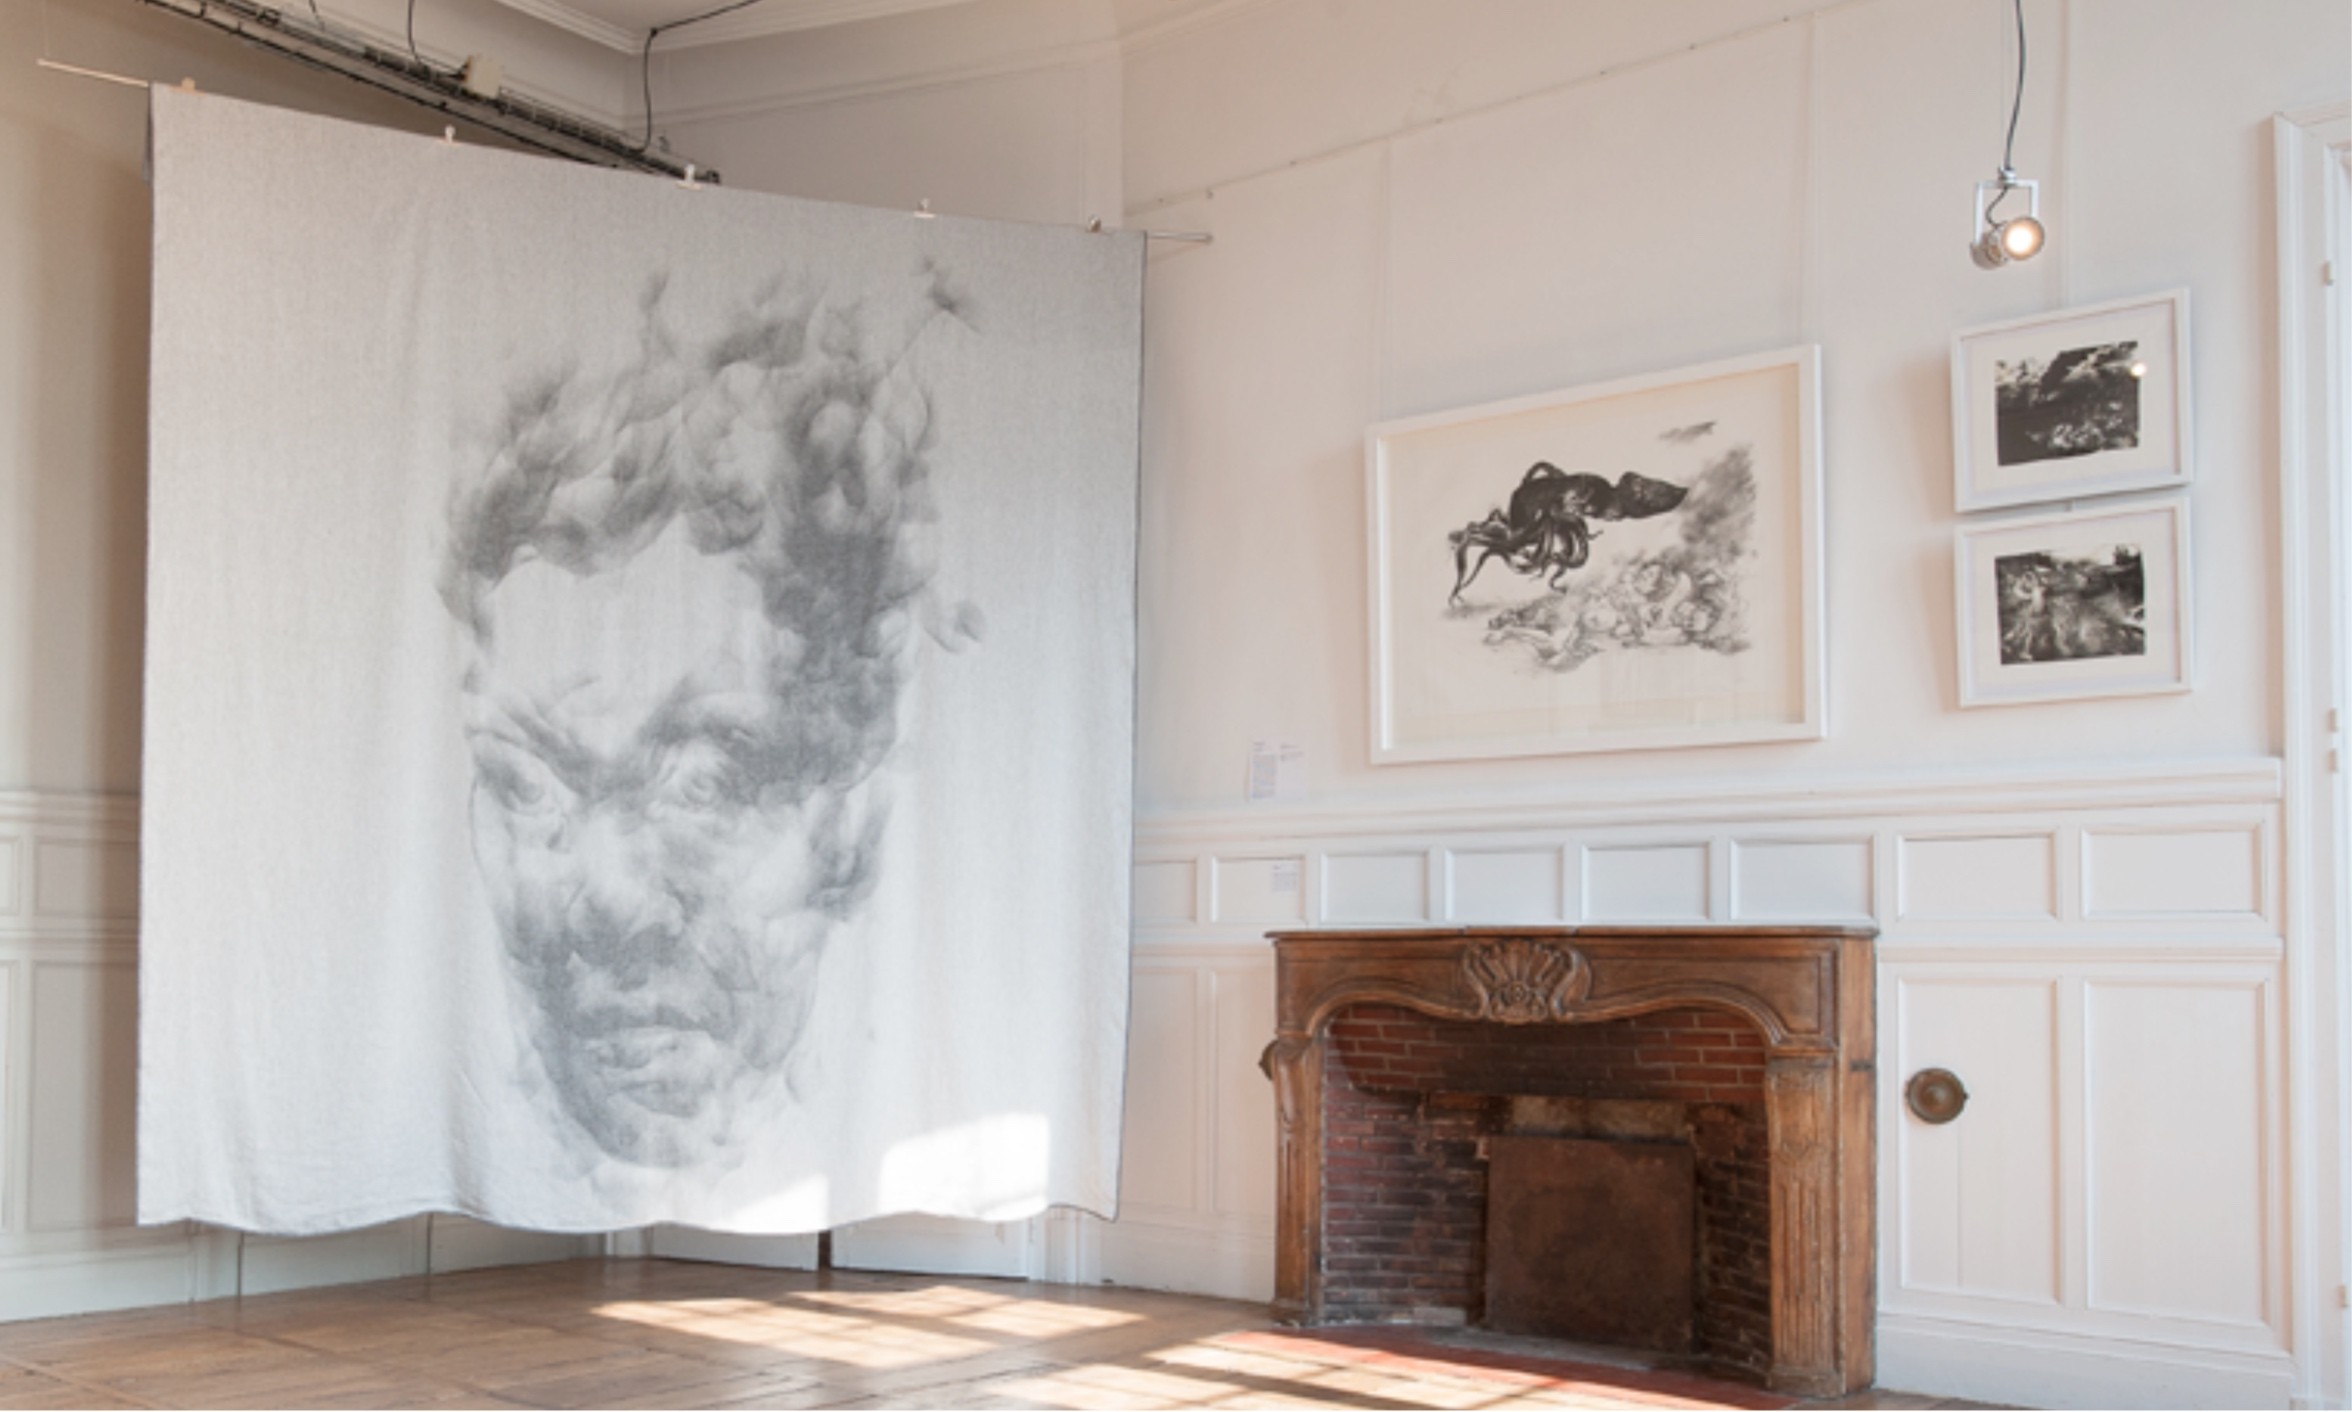 Woven picture, Diane Victor and Côme Touvay, on display at Château de Nontron 300 x 320cm, 100% woven linen © Atelier Le Grand Village